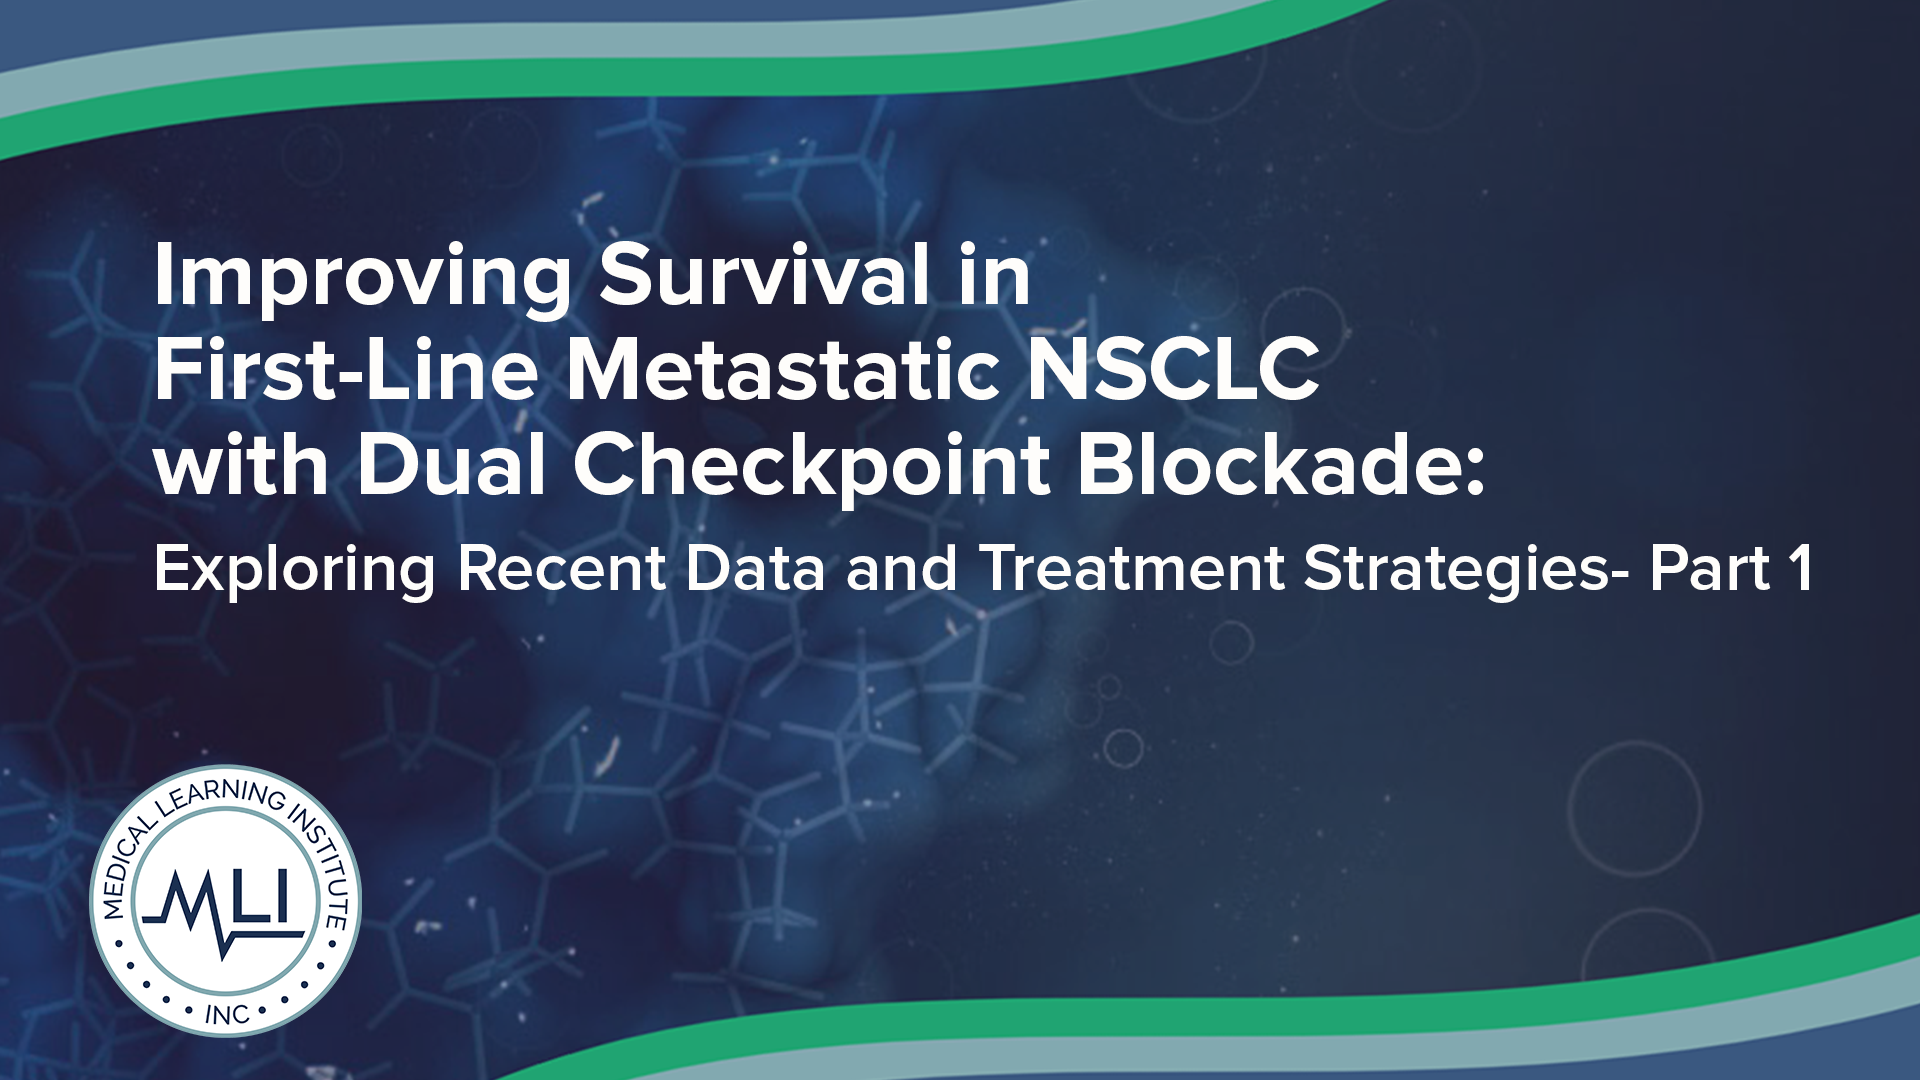 Improving Survival in First-Line Metastatic NSCLC with Dual Checkpoint Blockade